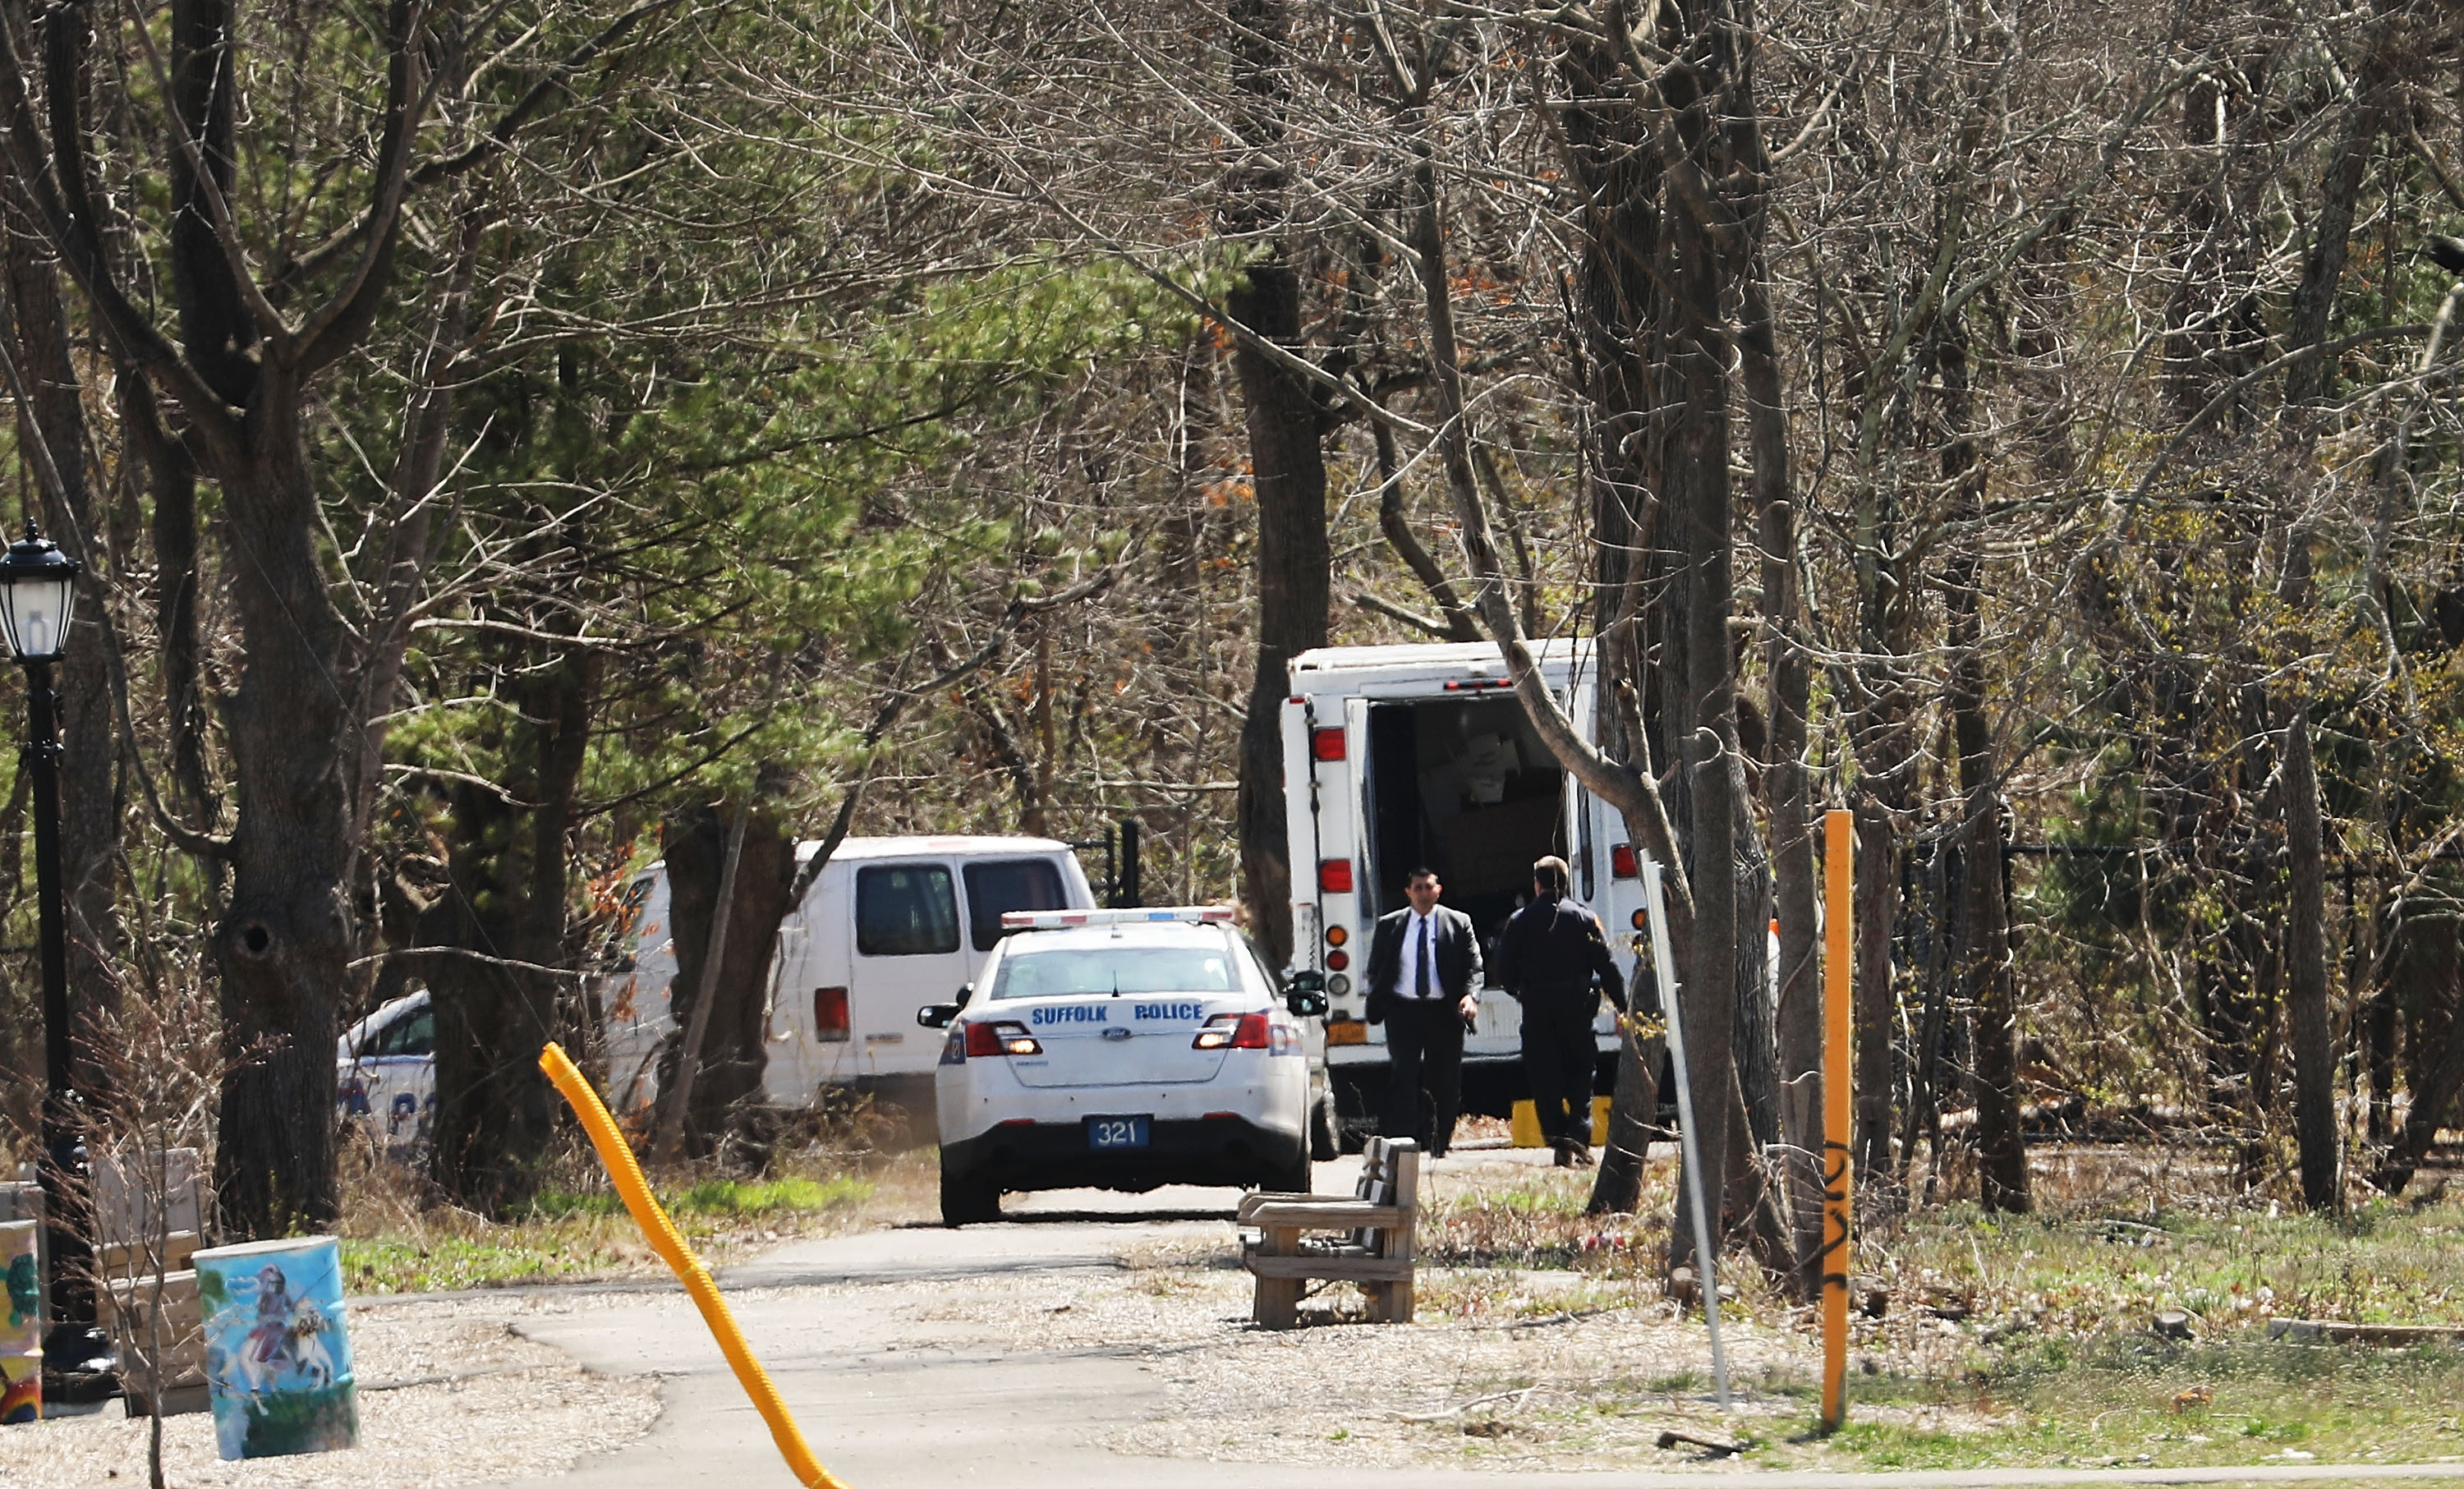 Police investigate the site where four young men were found murdered in a park in Central Islip, Long Island, on April 13. (Spencer Platt/Getty Images)